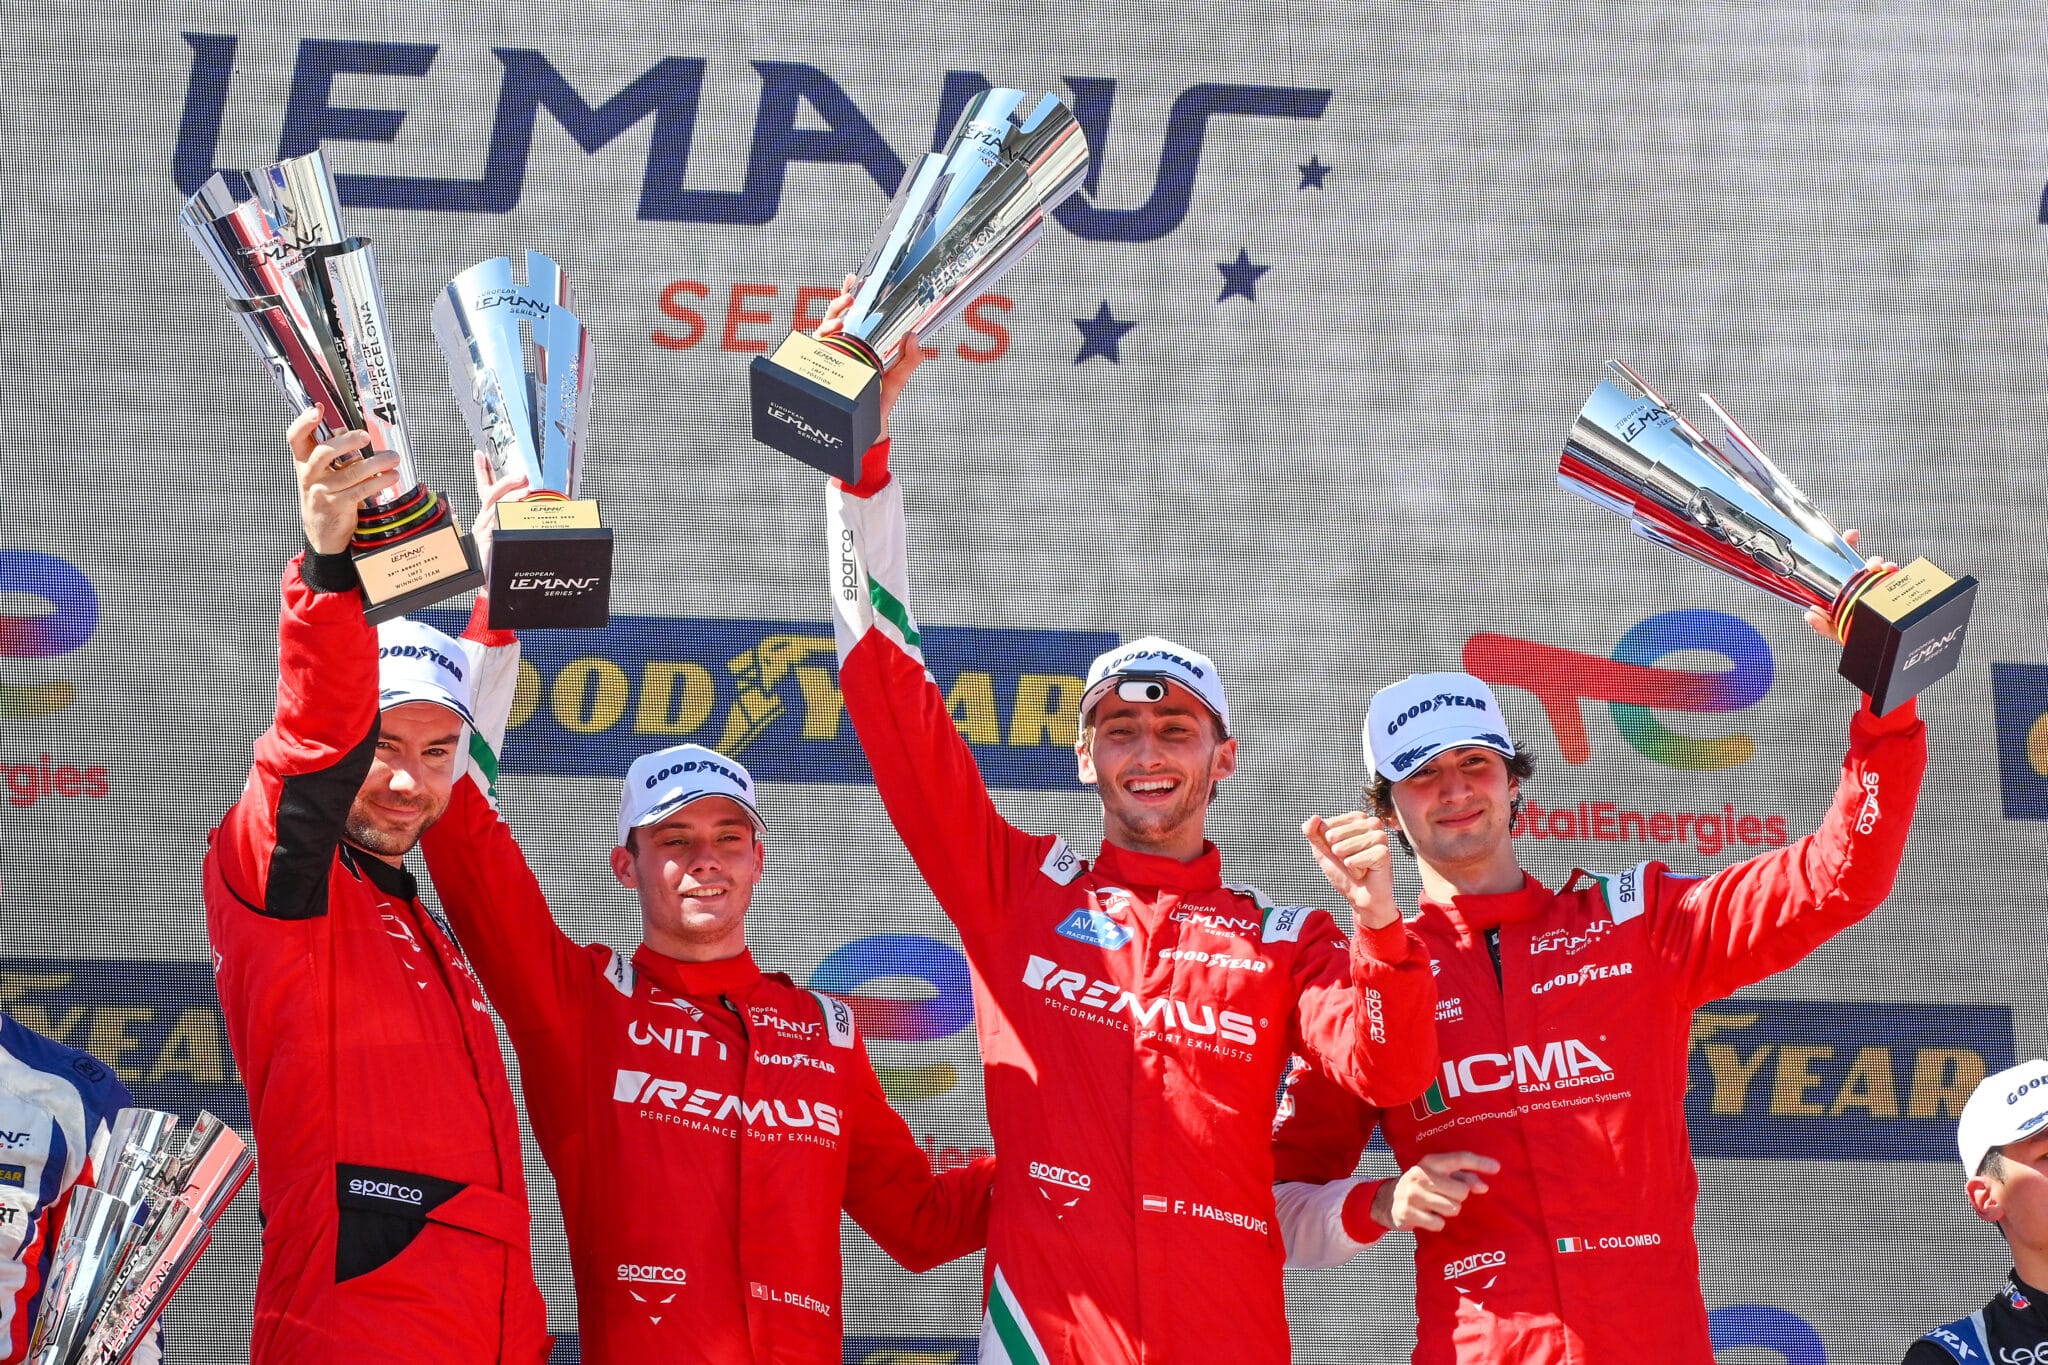 a group of men standing on top of a podium holding up trophies